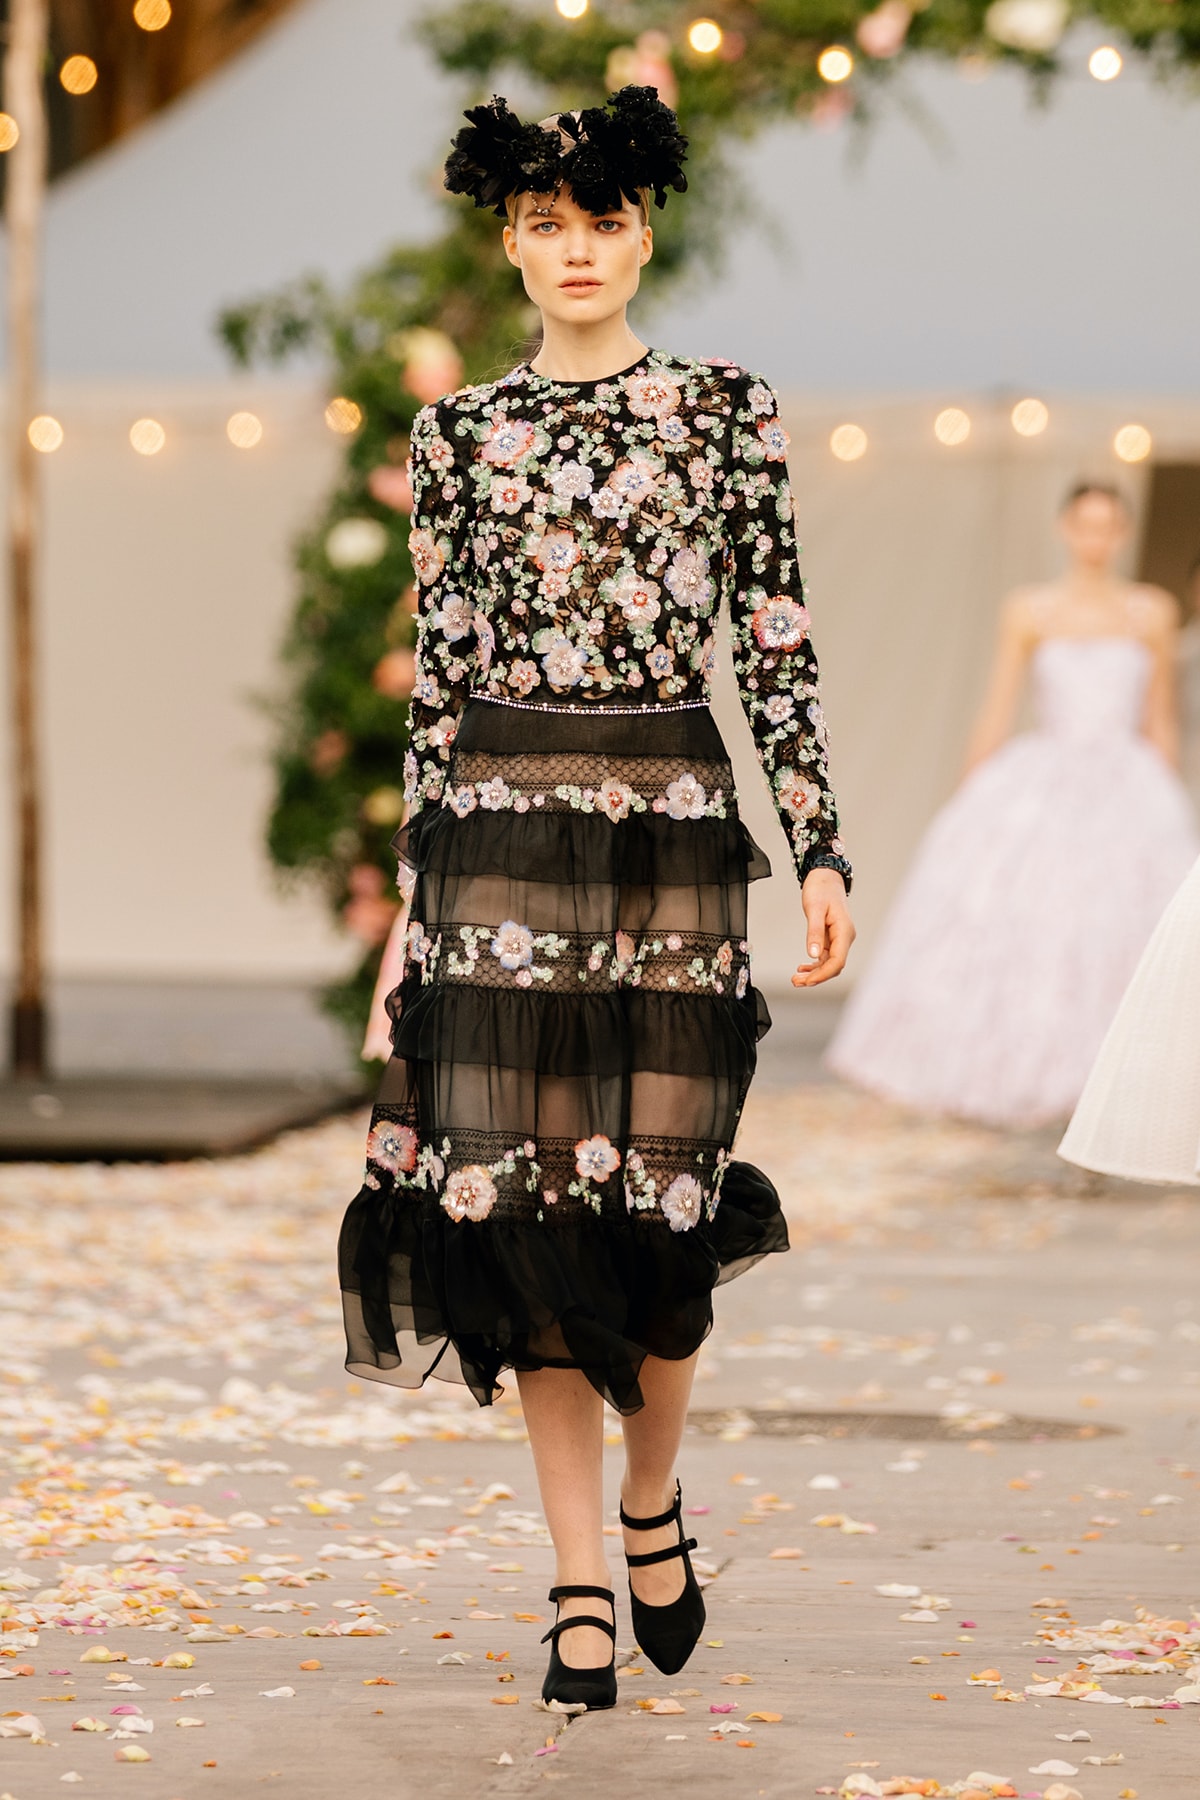 Chanel's SS21 Couture Collection Celebrates Family | Hypebae